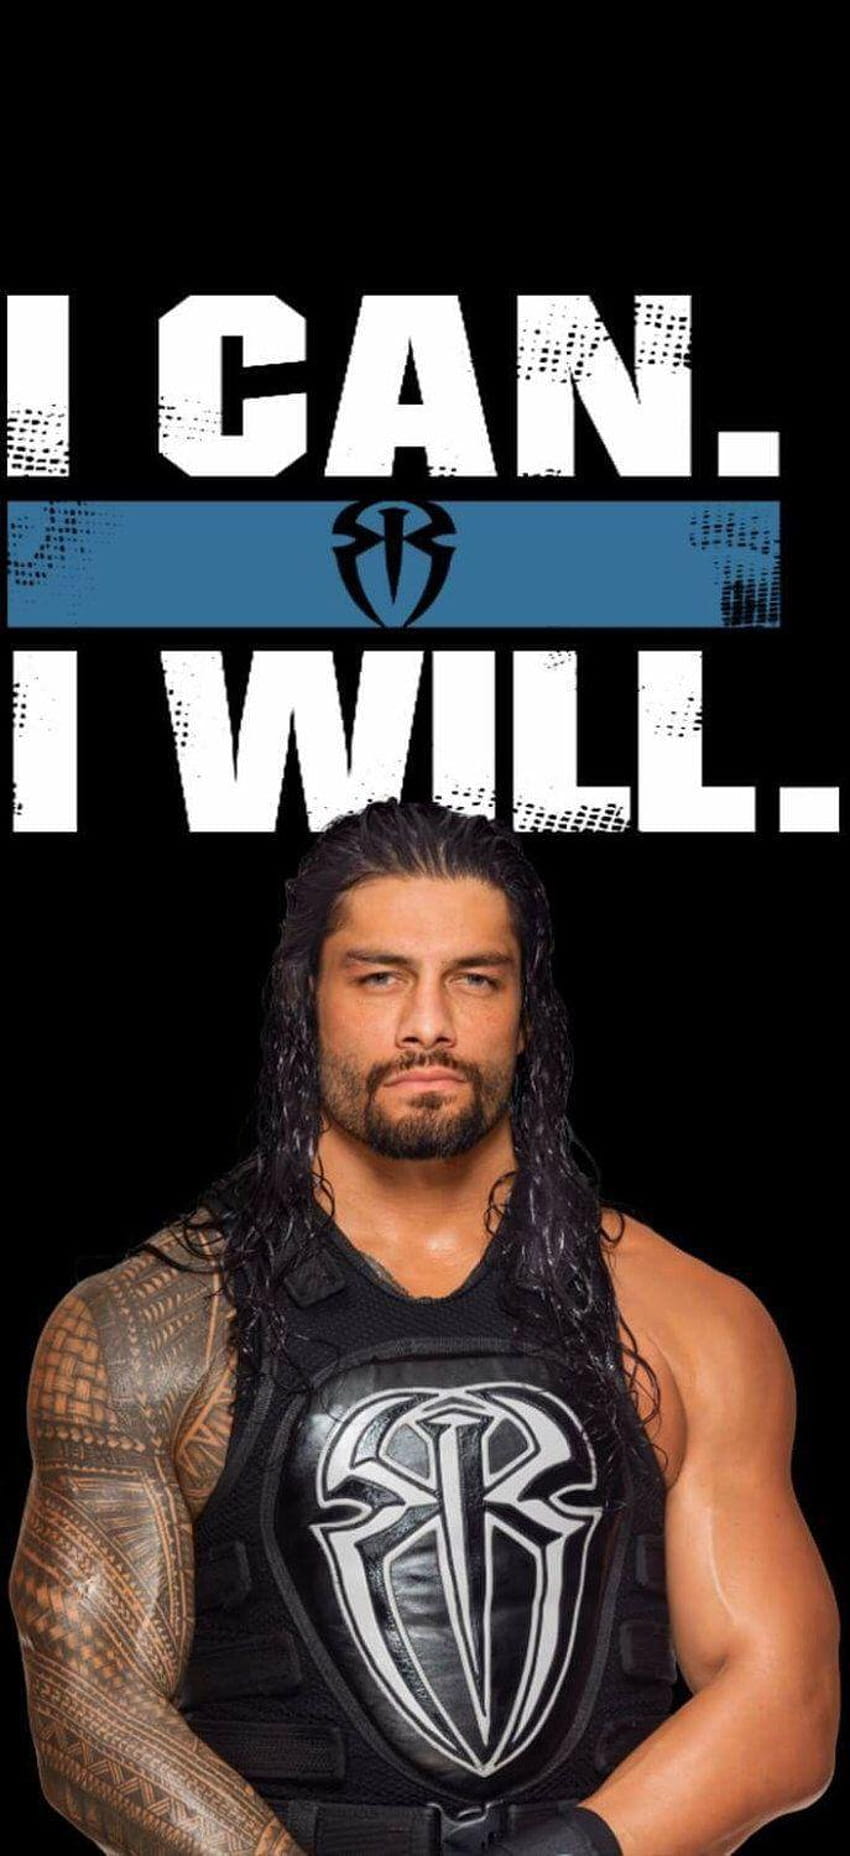 WWE Roman Reigns design perfect size for phone, roman reigns mobile HD phone wallpaper